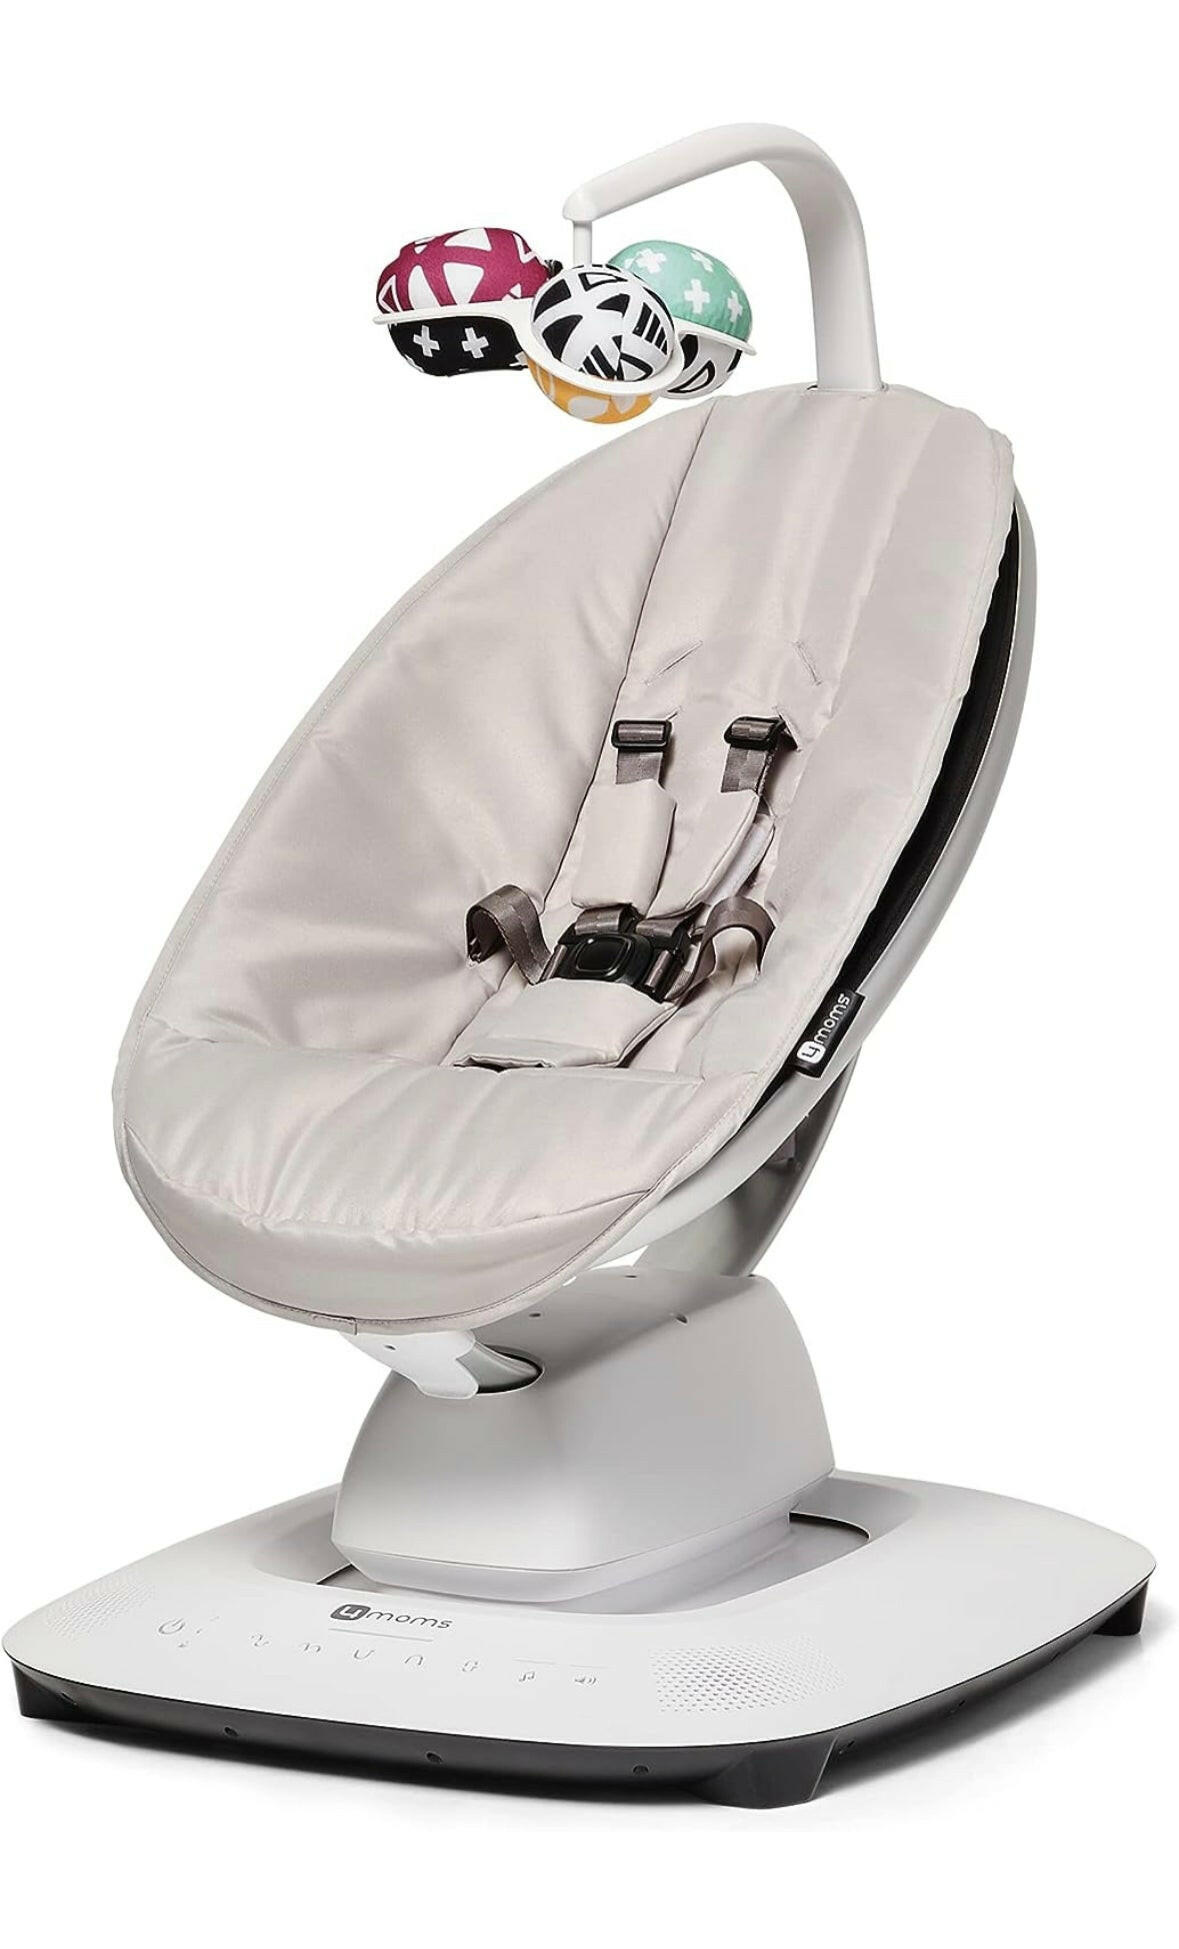 4moms MamaRoo Multi-Motion Baby Swing, Bluetooth Enabled with 5 Unique Motions, Grey.